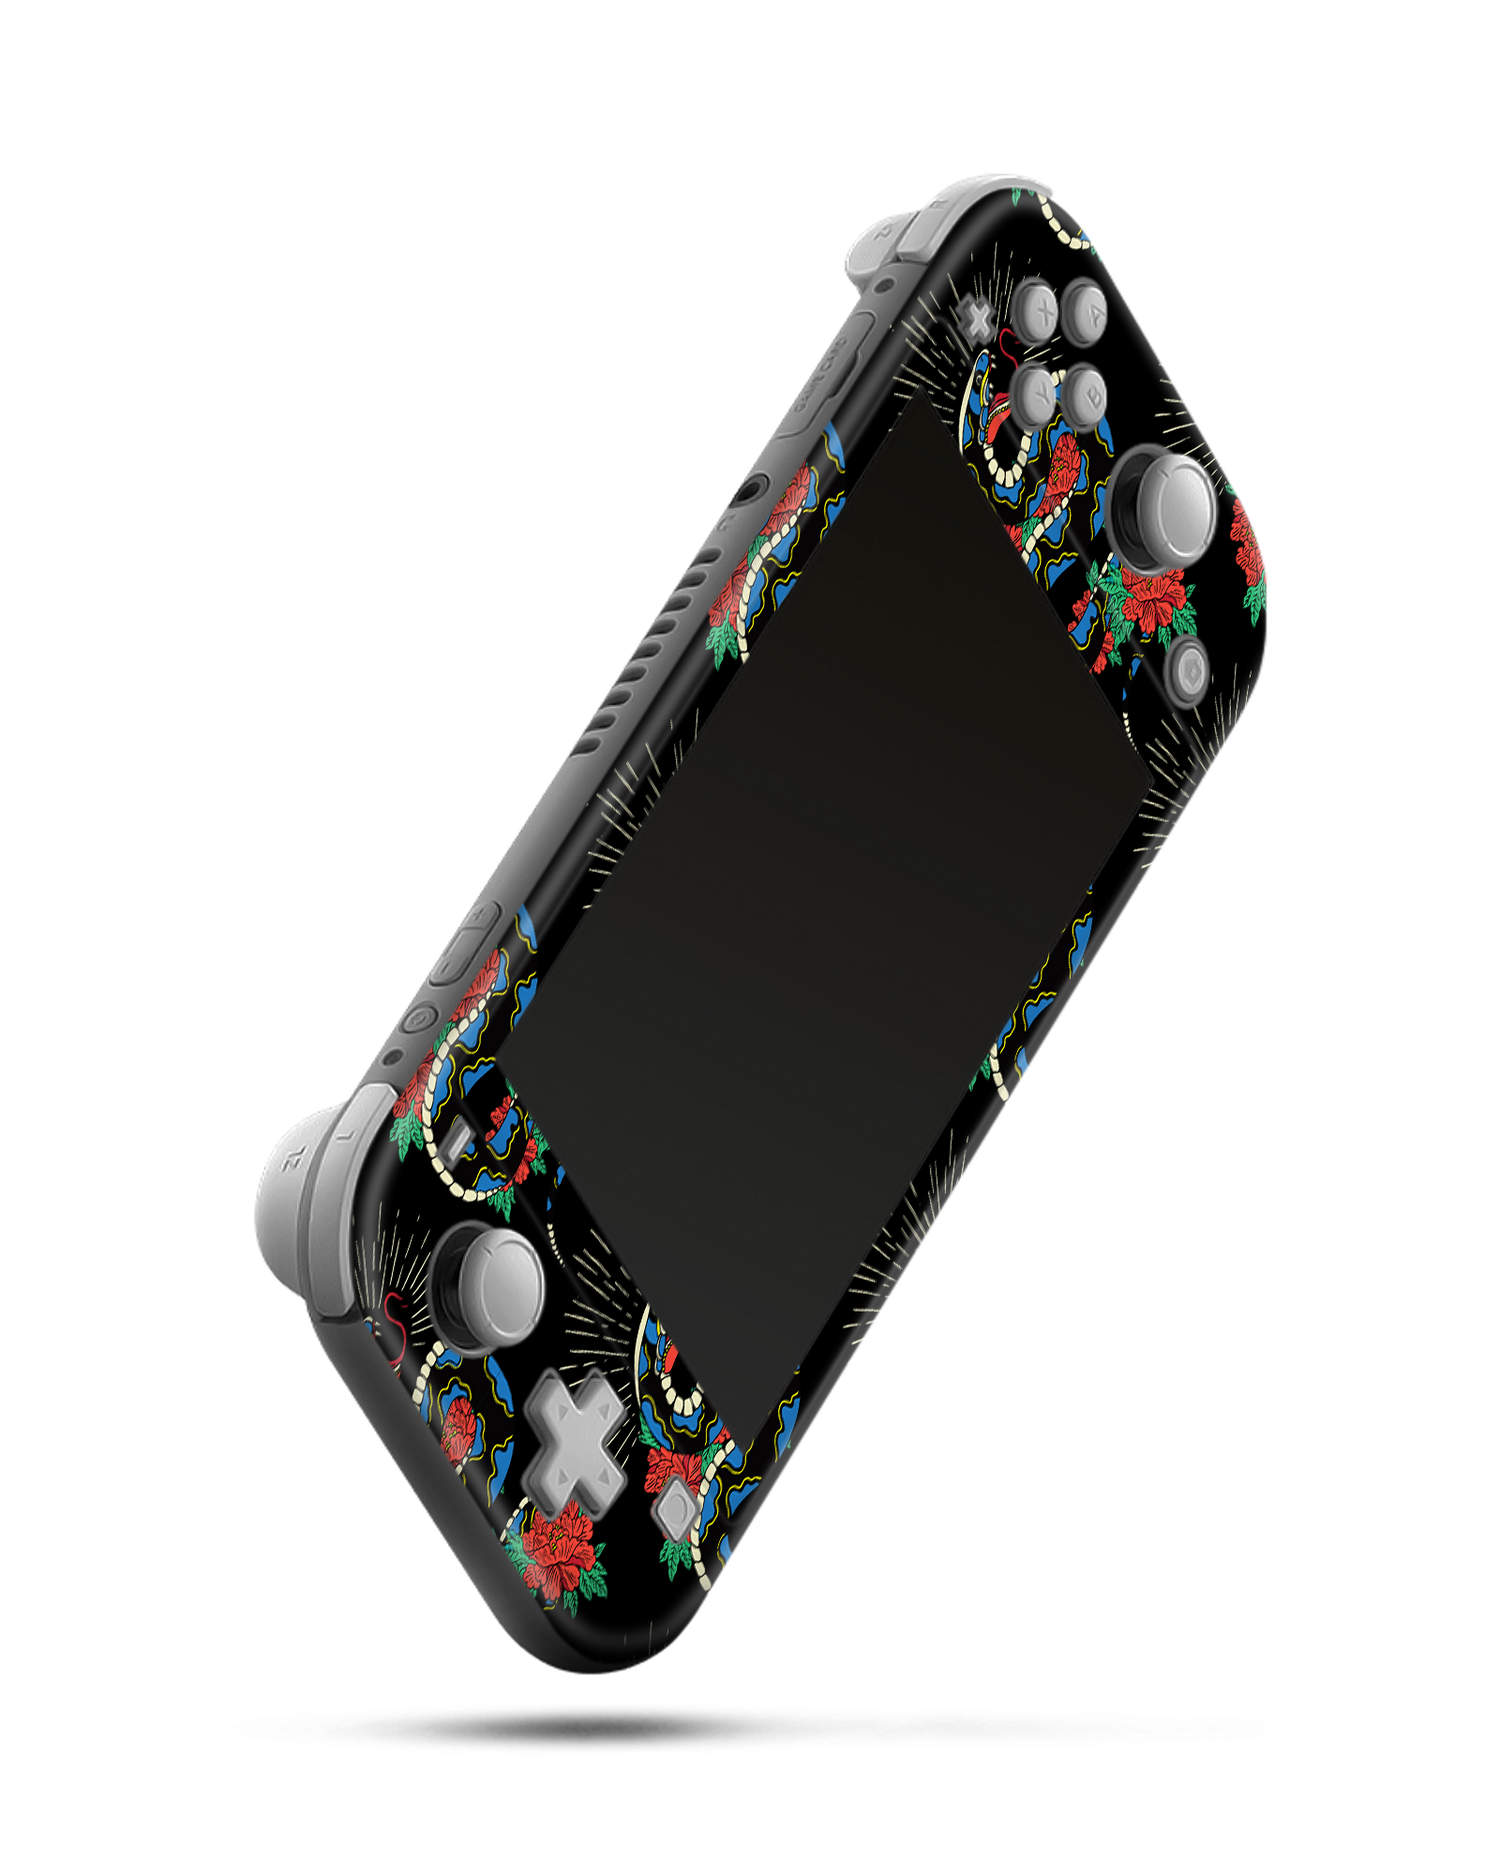 Repeating Snakes 2 Console Skin for Nintendo Switch Lite: Side view